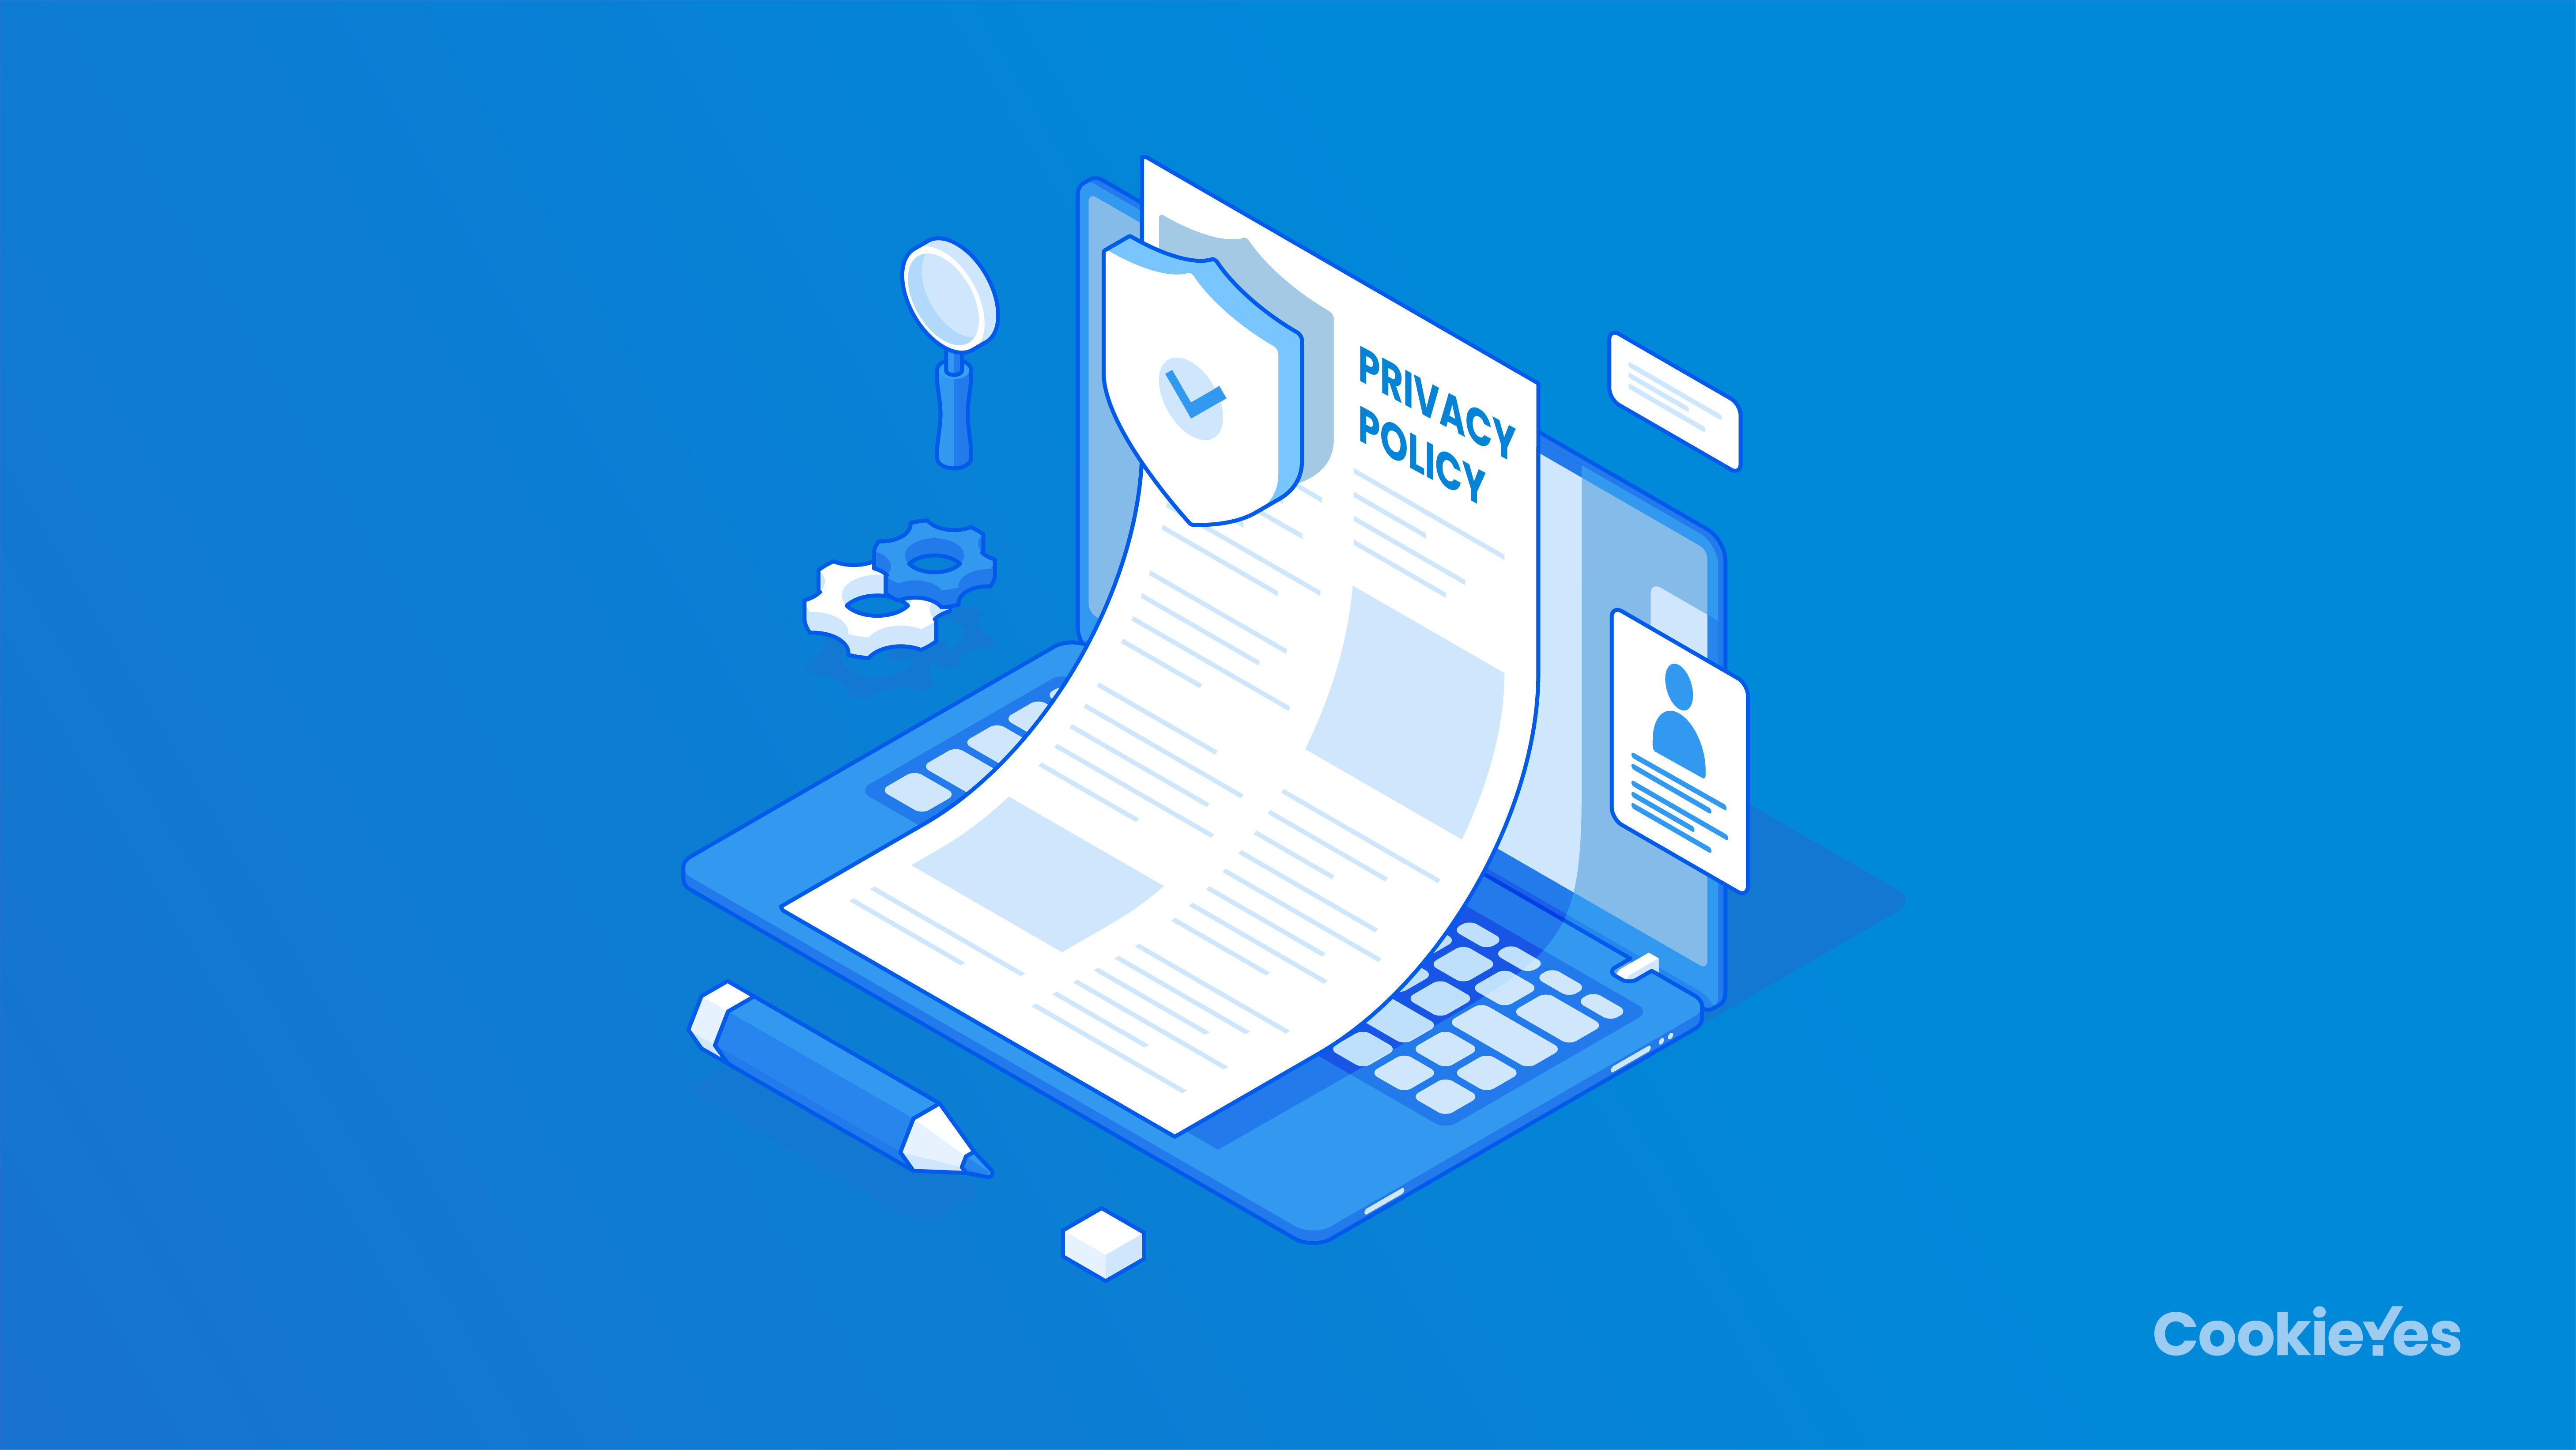 Privacy Policy Template for Legal Compliance [With Examples]